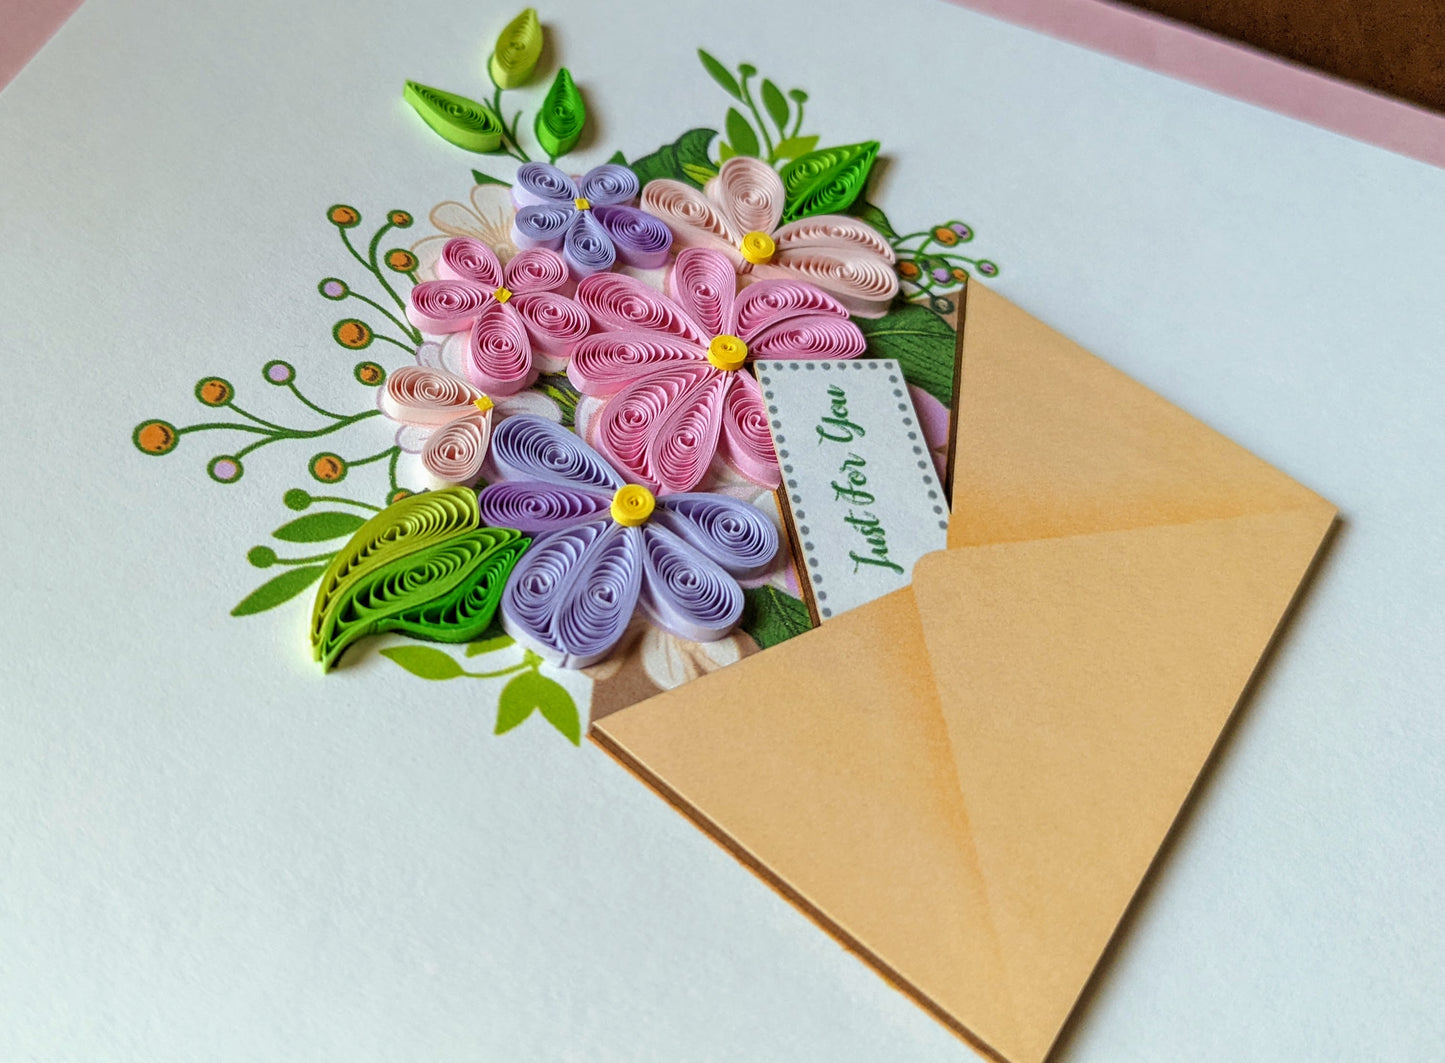 Just for You Floral Envelope Quilling Card